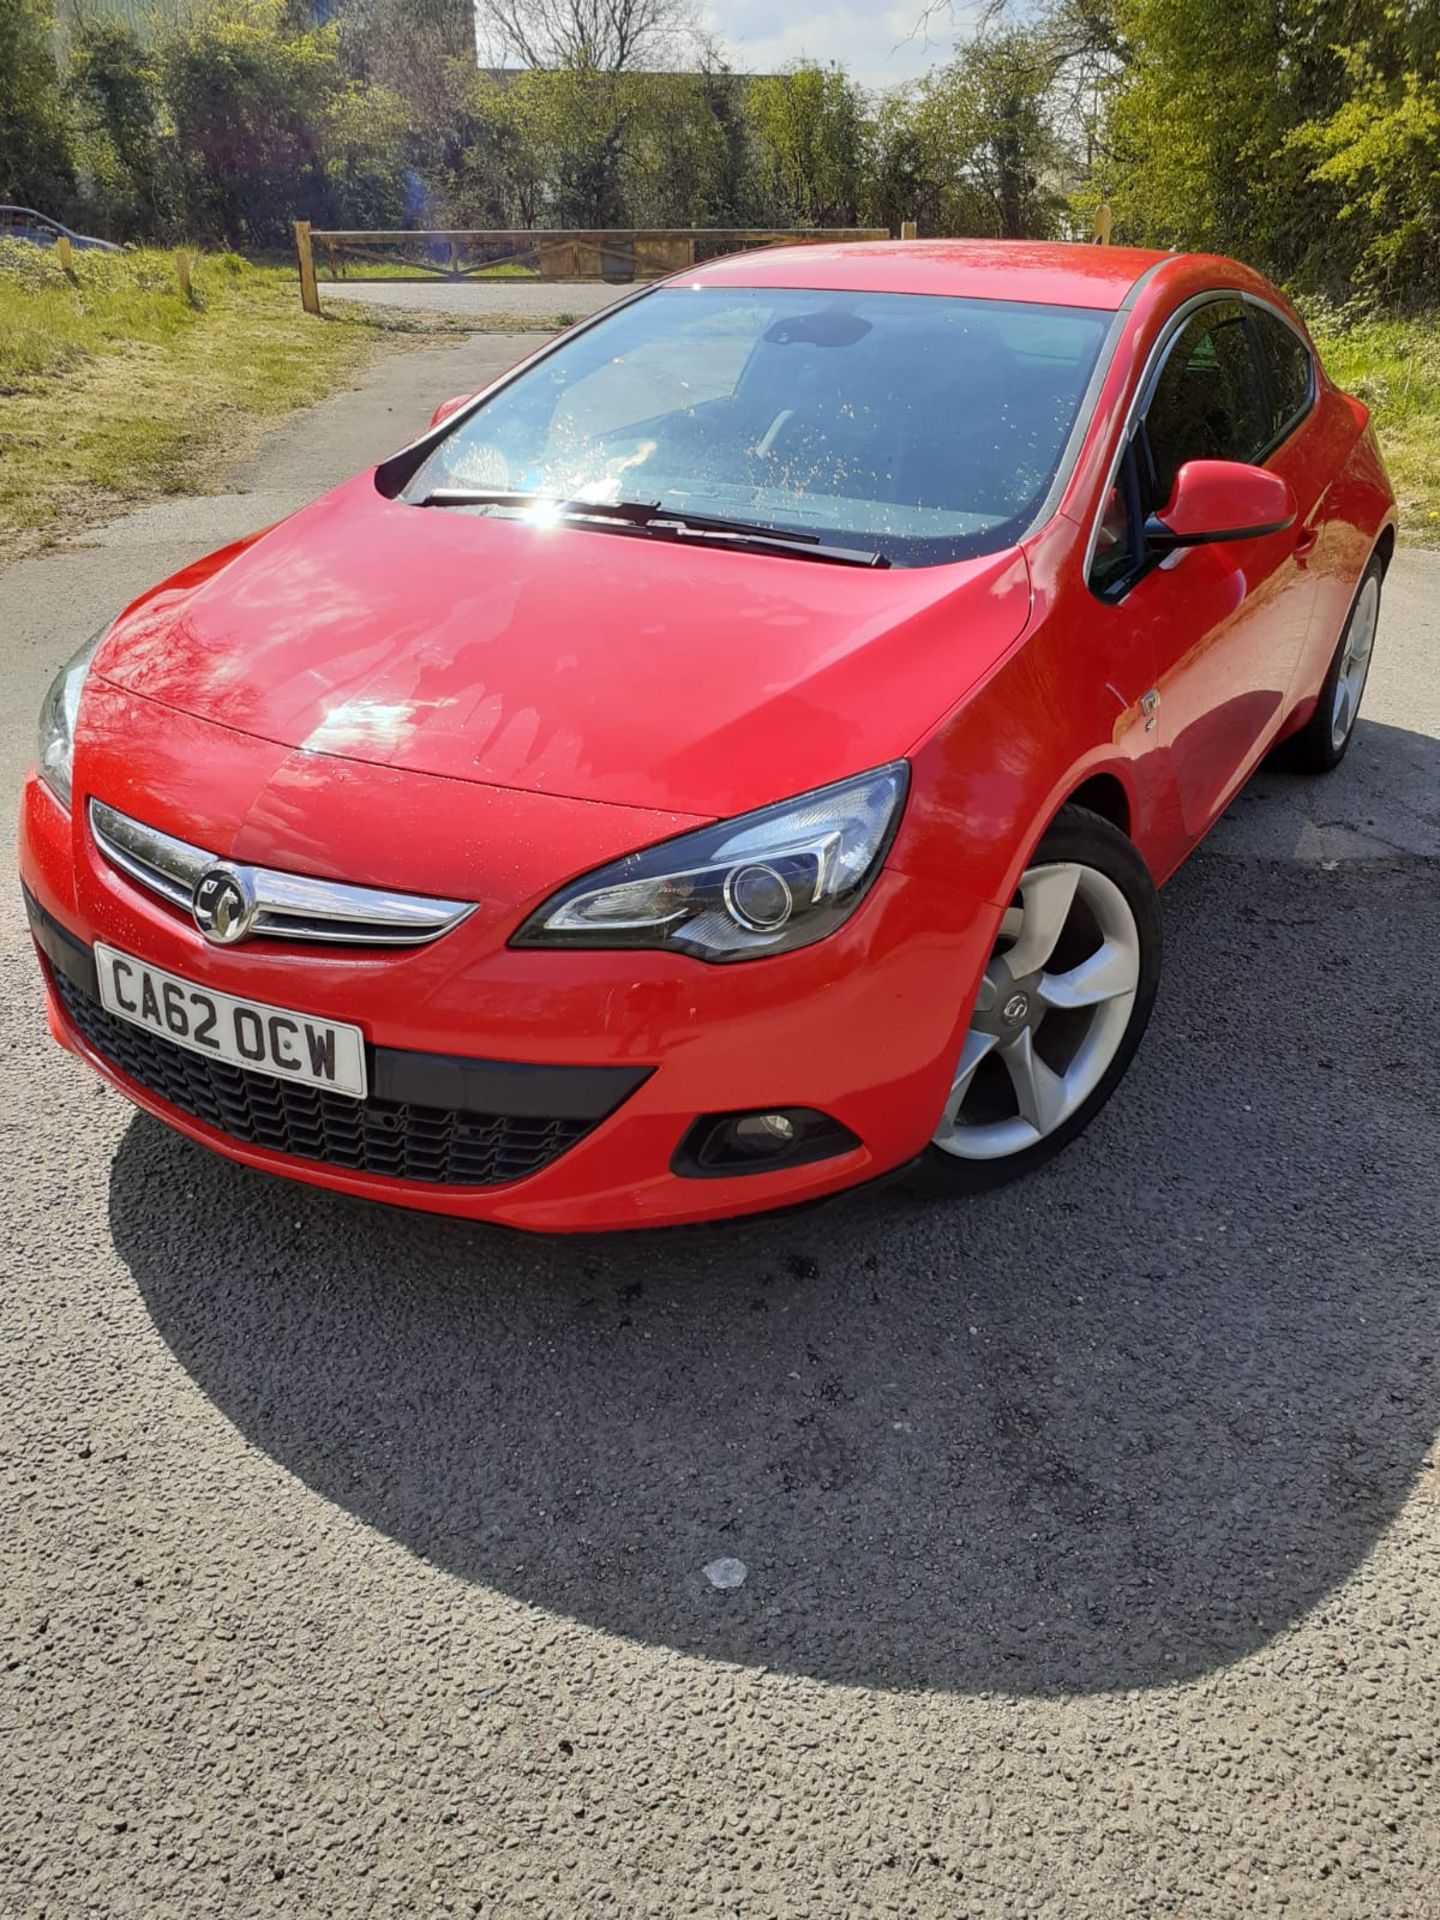 2013 VAUXHALL ASTRA GTC SRI CDTI S/S, 3 DOOR HATCHBACK, SHOWING 3 PREVIOUS KEEPERS, DIESEL ENGINE